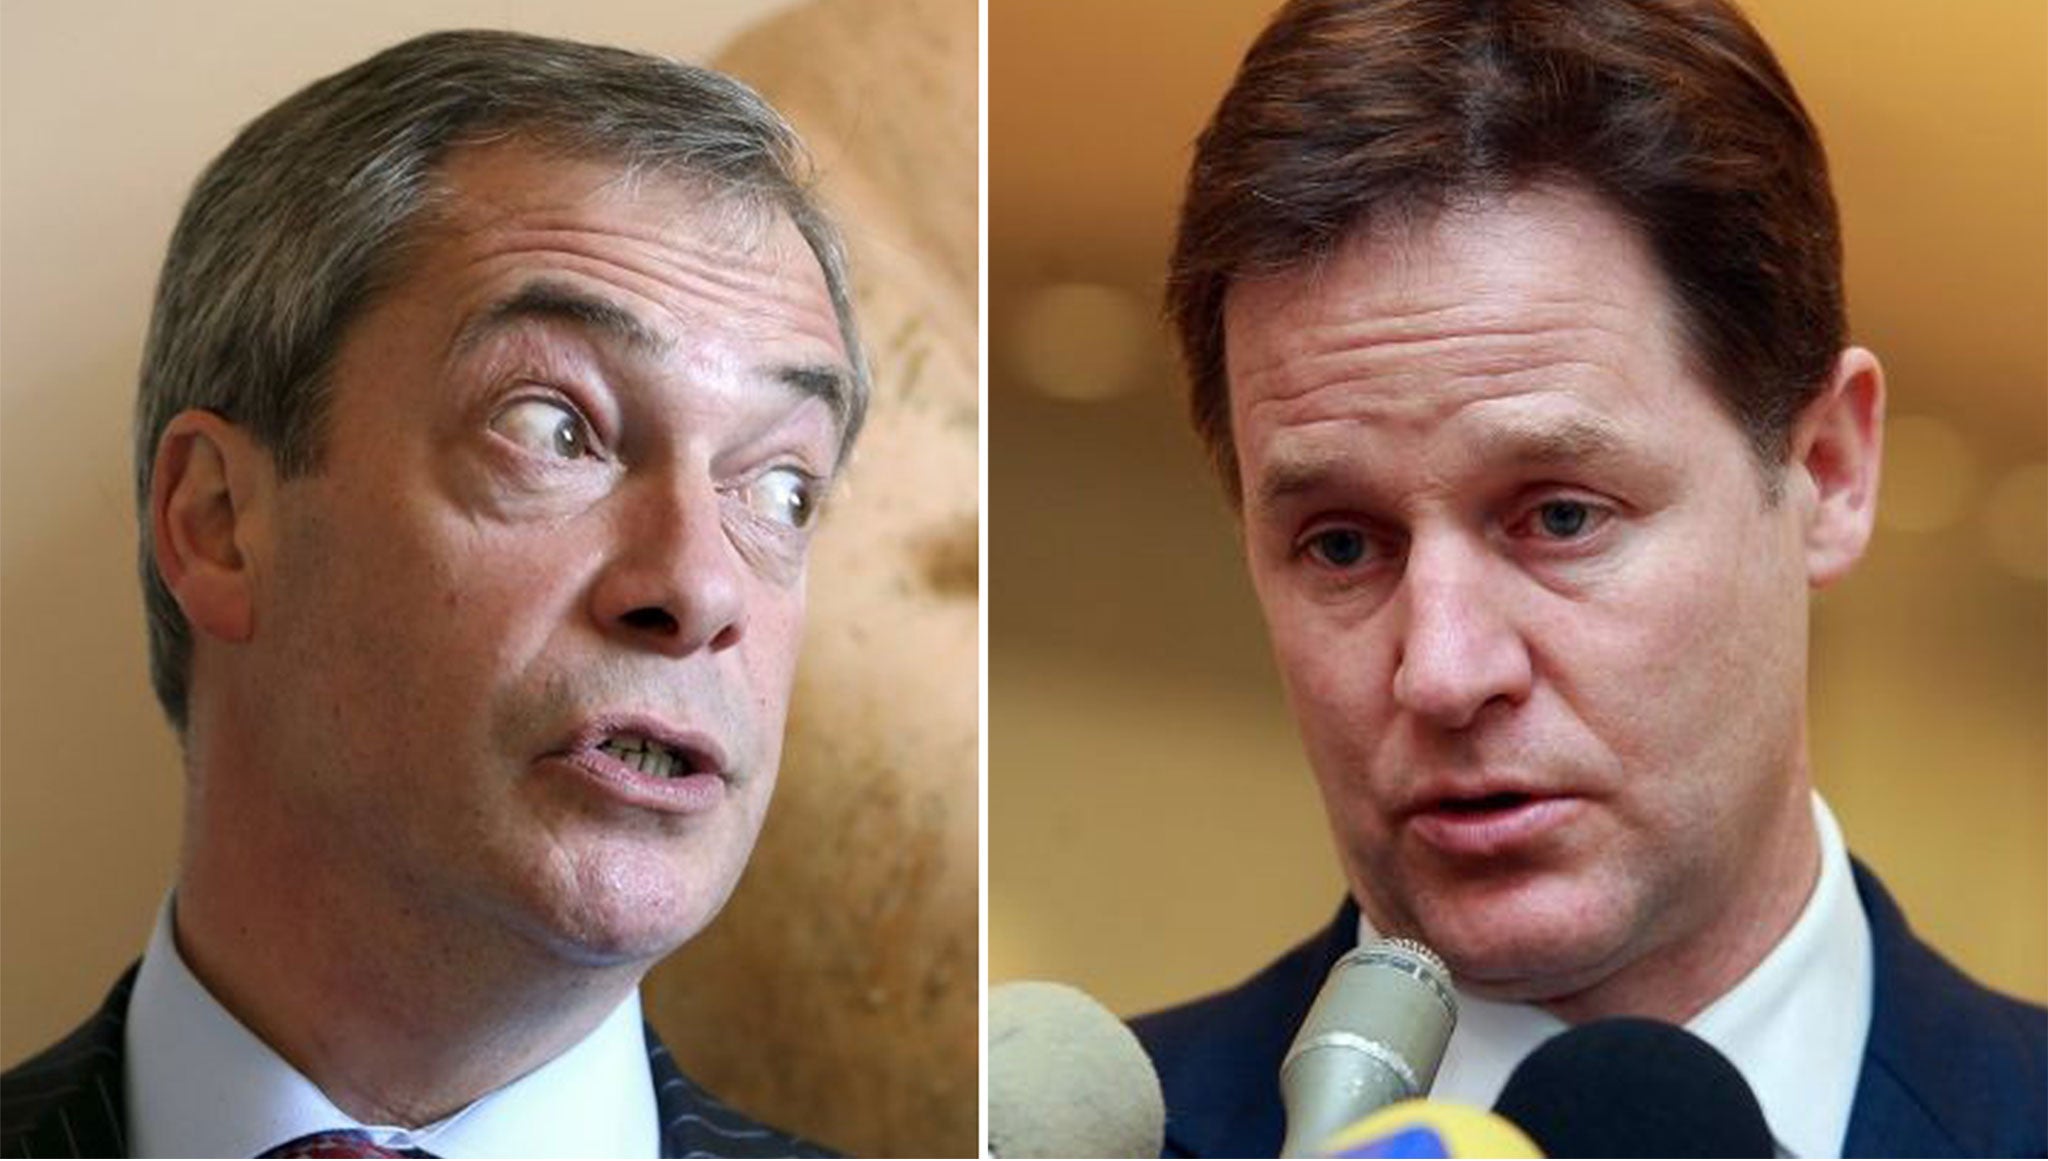 Nick Clegg has challenged Nigel Farage to a public debate about whether Britain should be in or out of the European Union